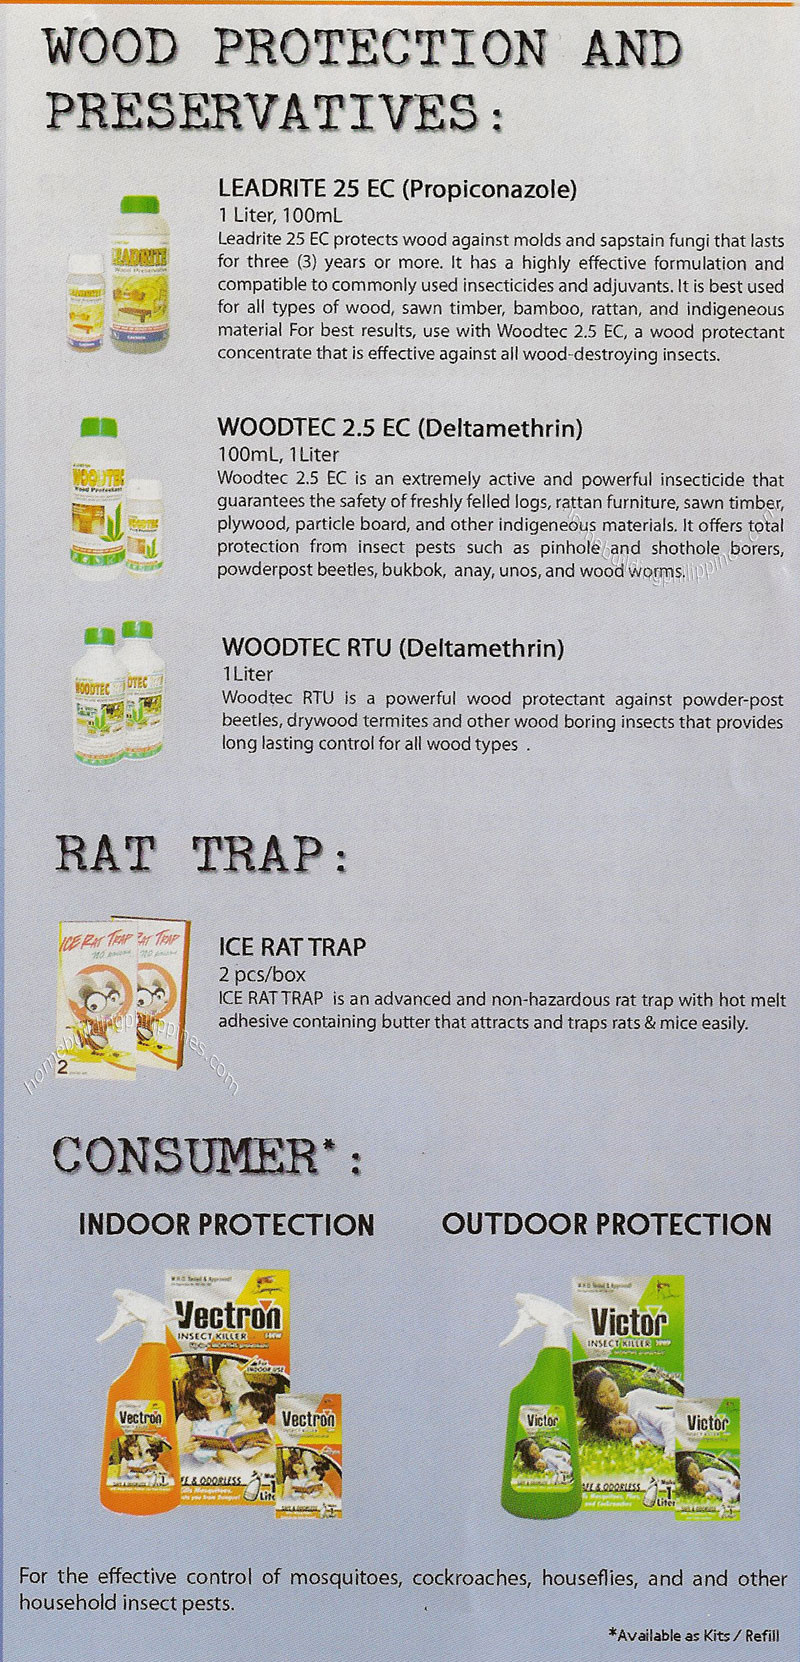 Wood Protection and Preservatives; Rat Trap